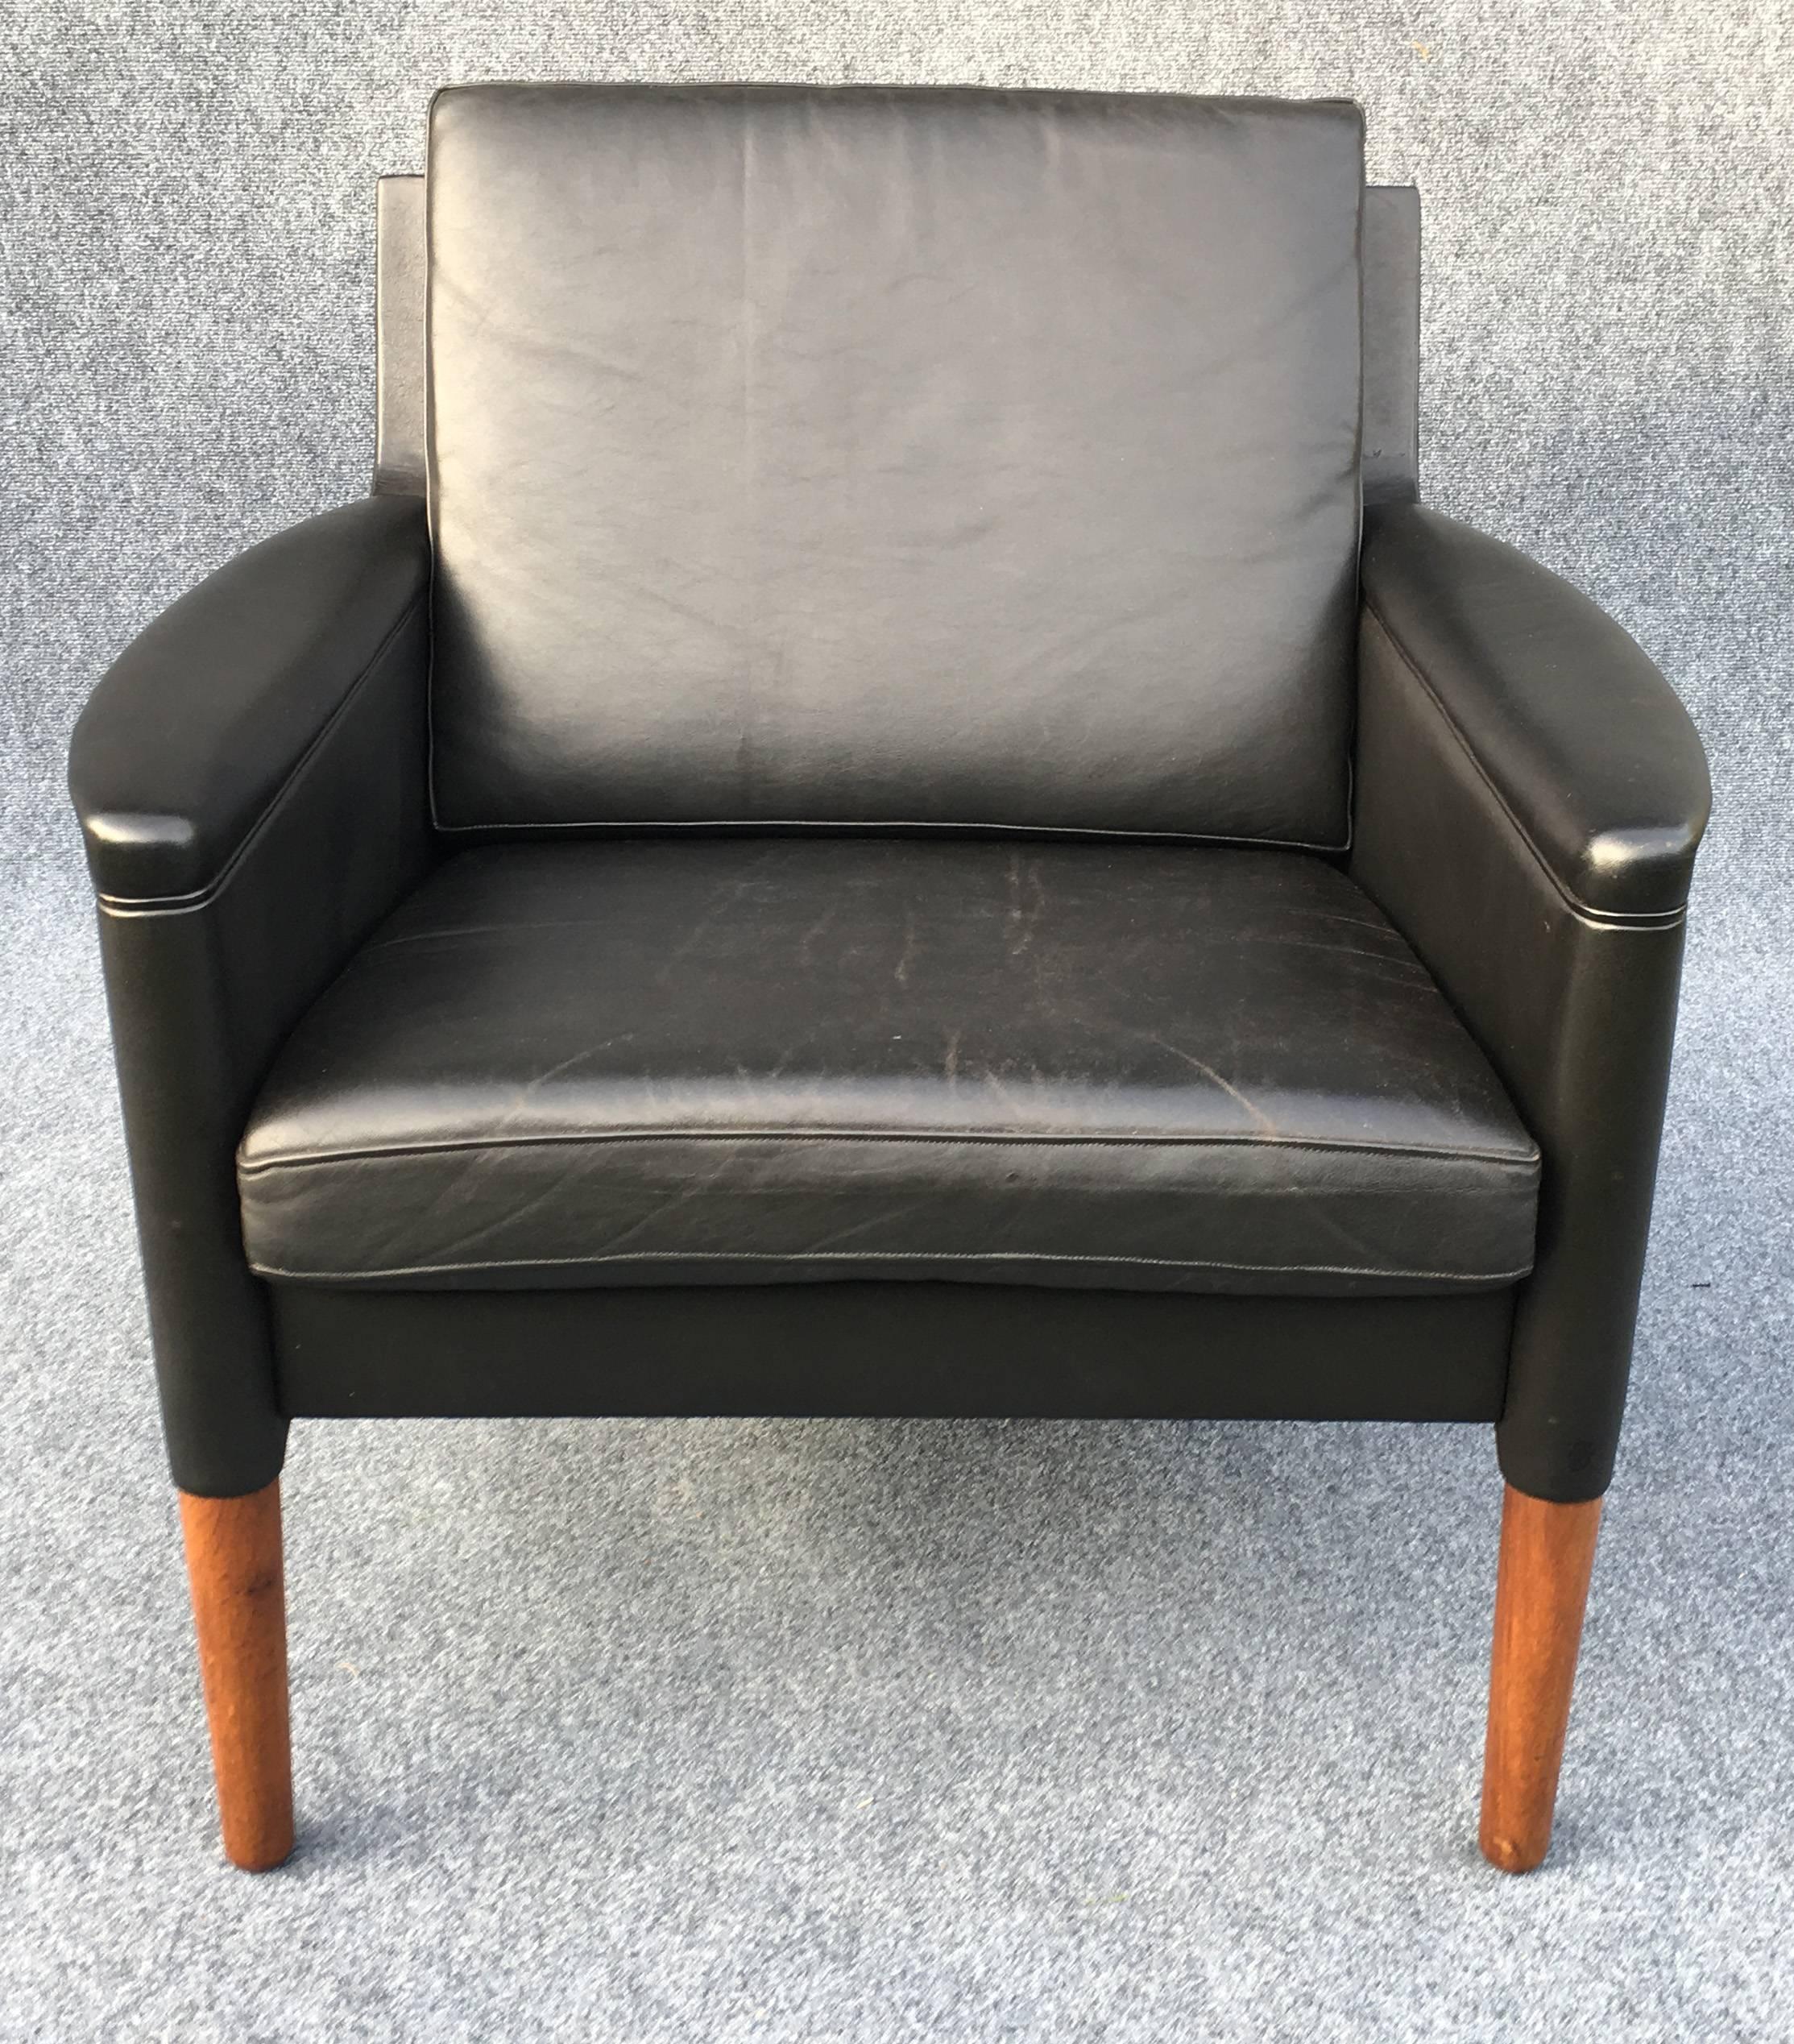 A very nice original example of the lower back version from the well-known Danish designer Kurt Ostervig, in original leather with nice patina.